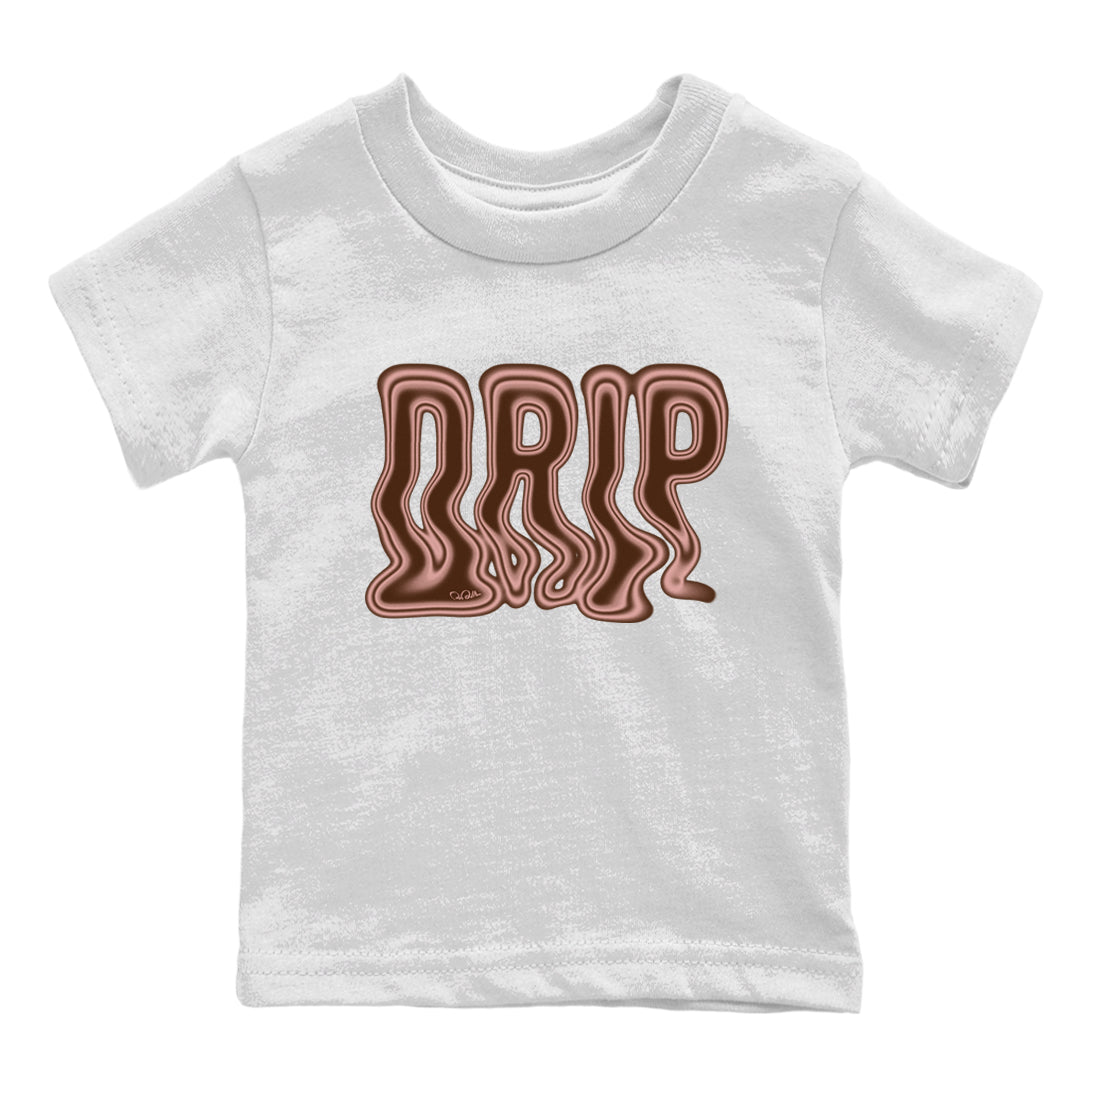 Air More Uptempo Valentines Day Sneaker Tees Drip Gear Zone Drip Sneaker Tees Nike Uptempo Valentines Day Shirt Kids Shirts White 2